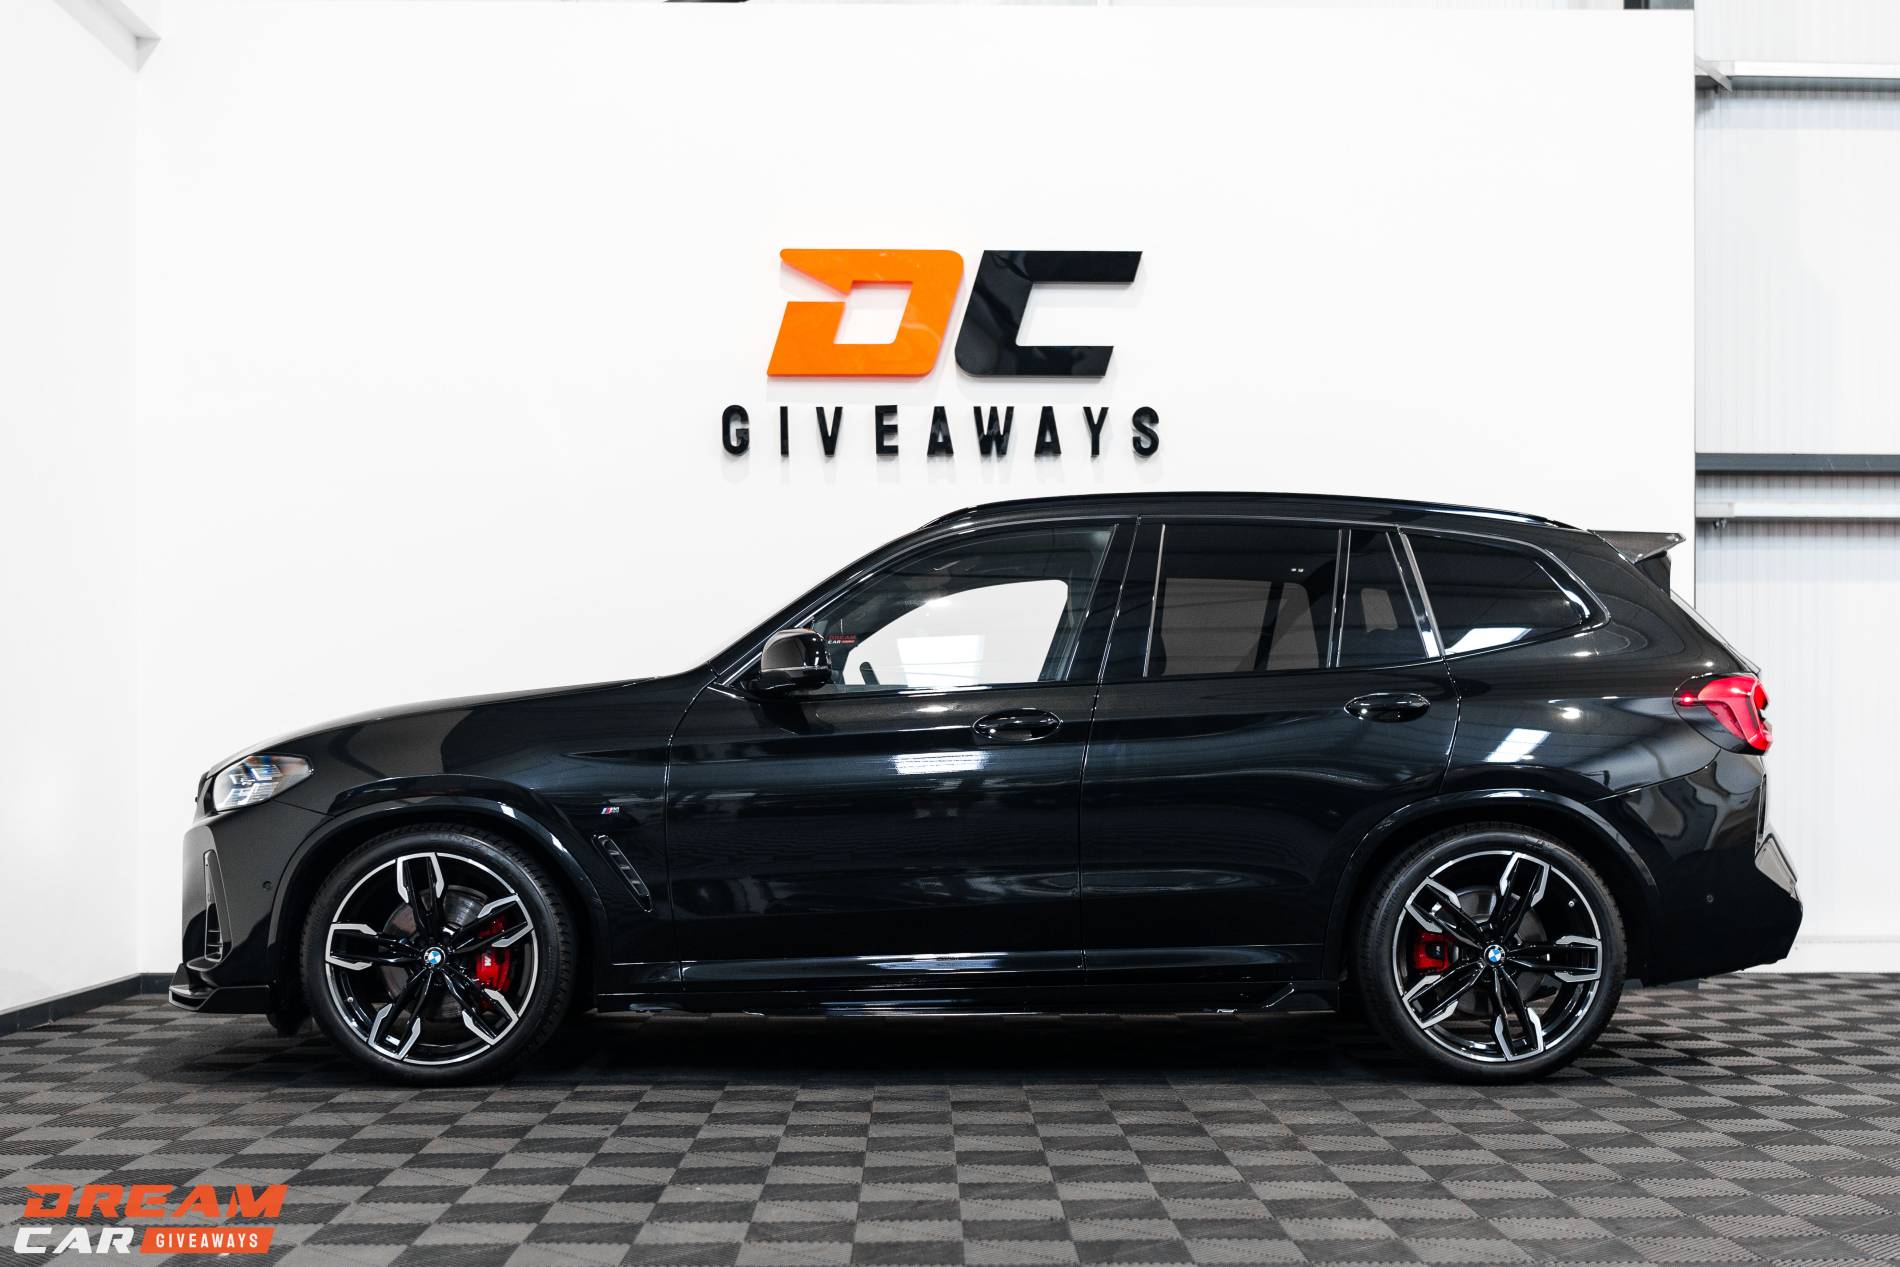 Win this BMW X3 M40D & £1,000 or £41,000 Tax Free